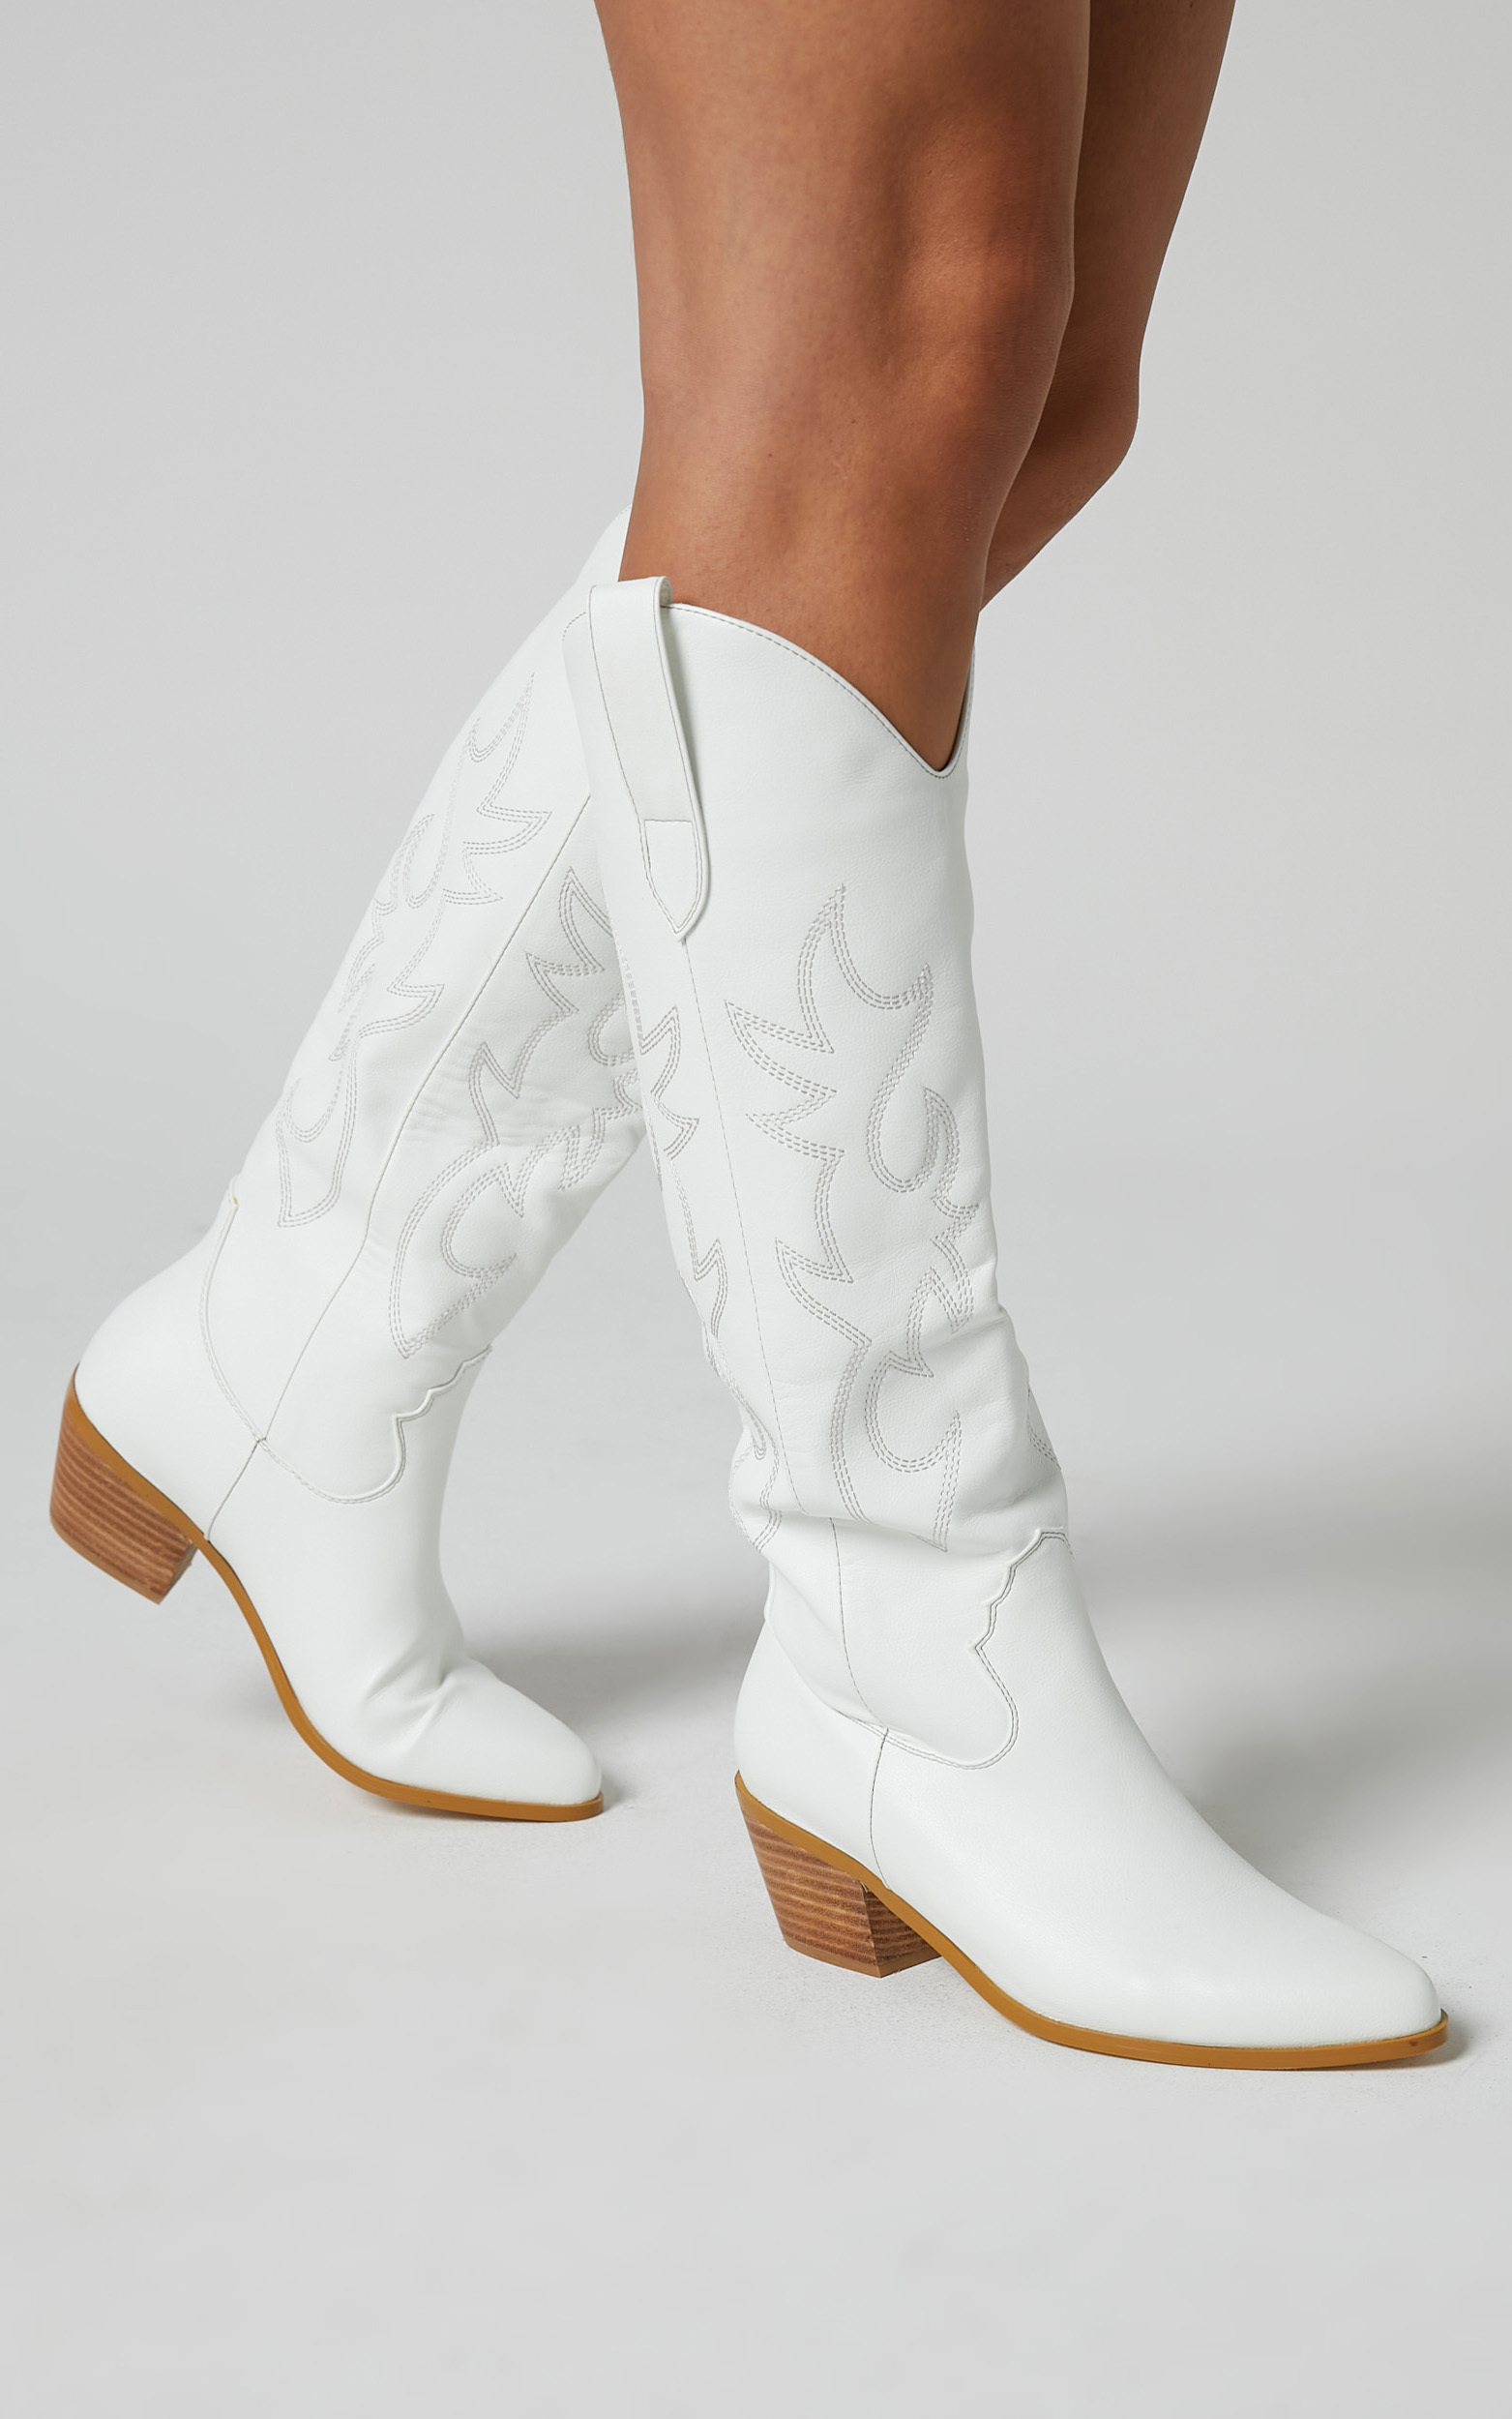 Billini - Urson Boots in White - 06, WHT1, hi-res image number null